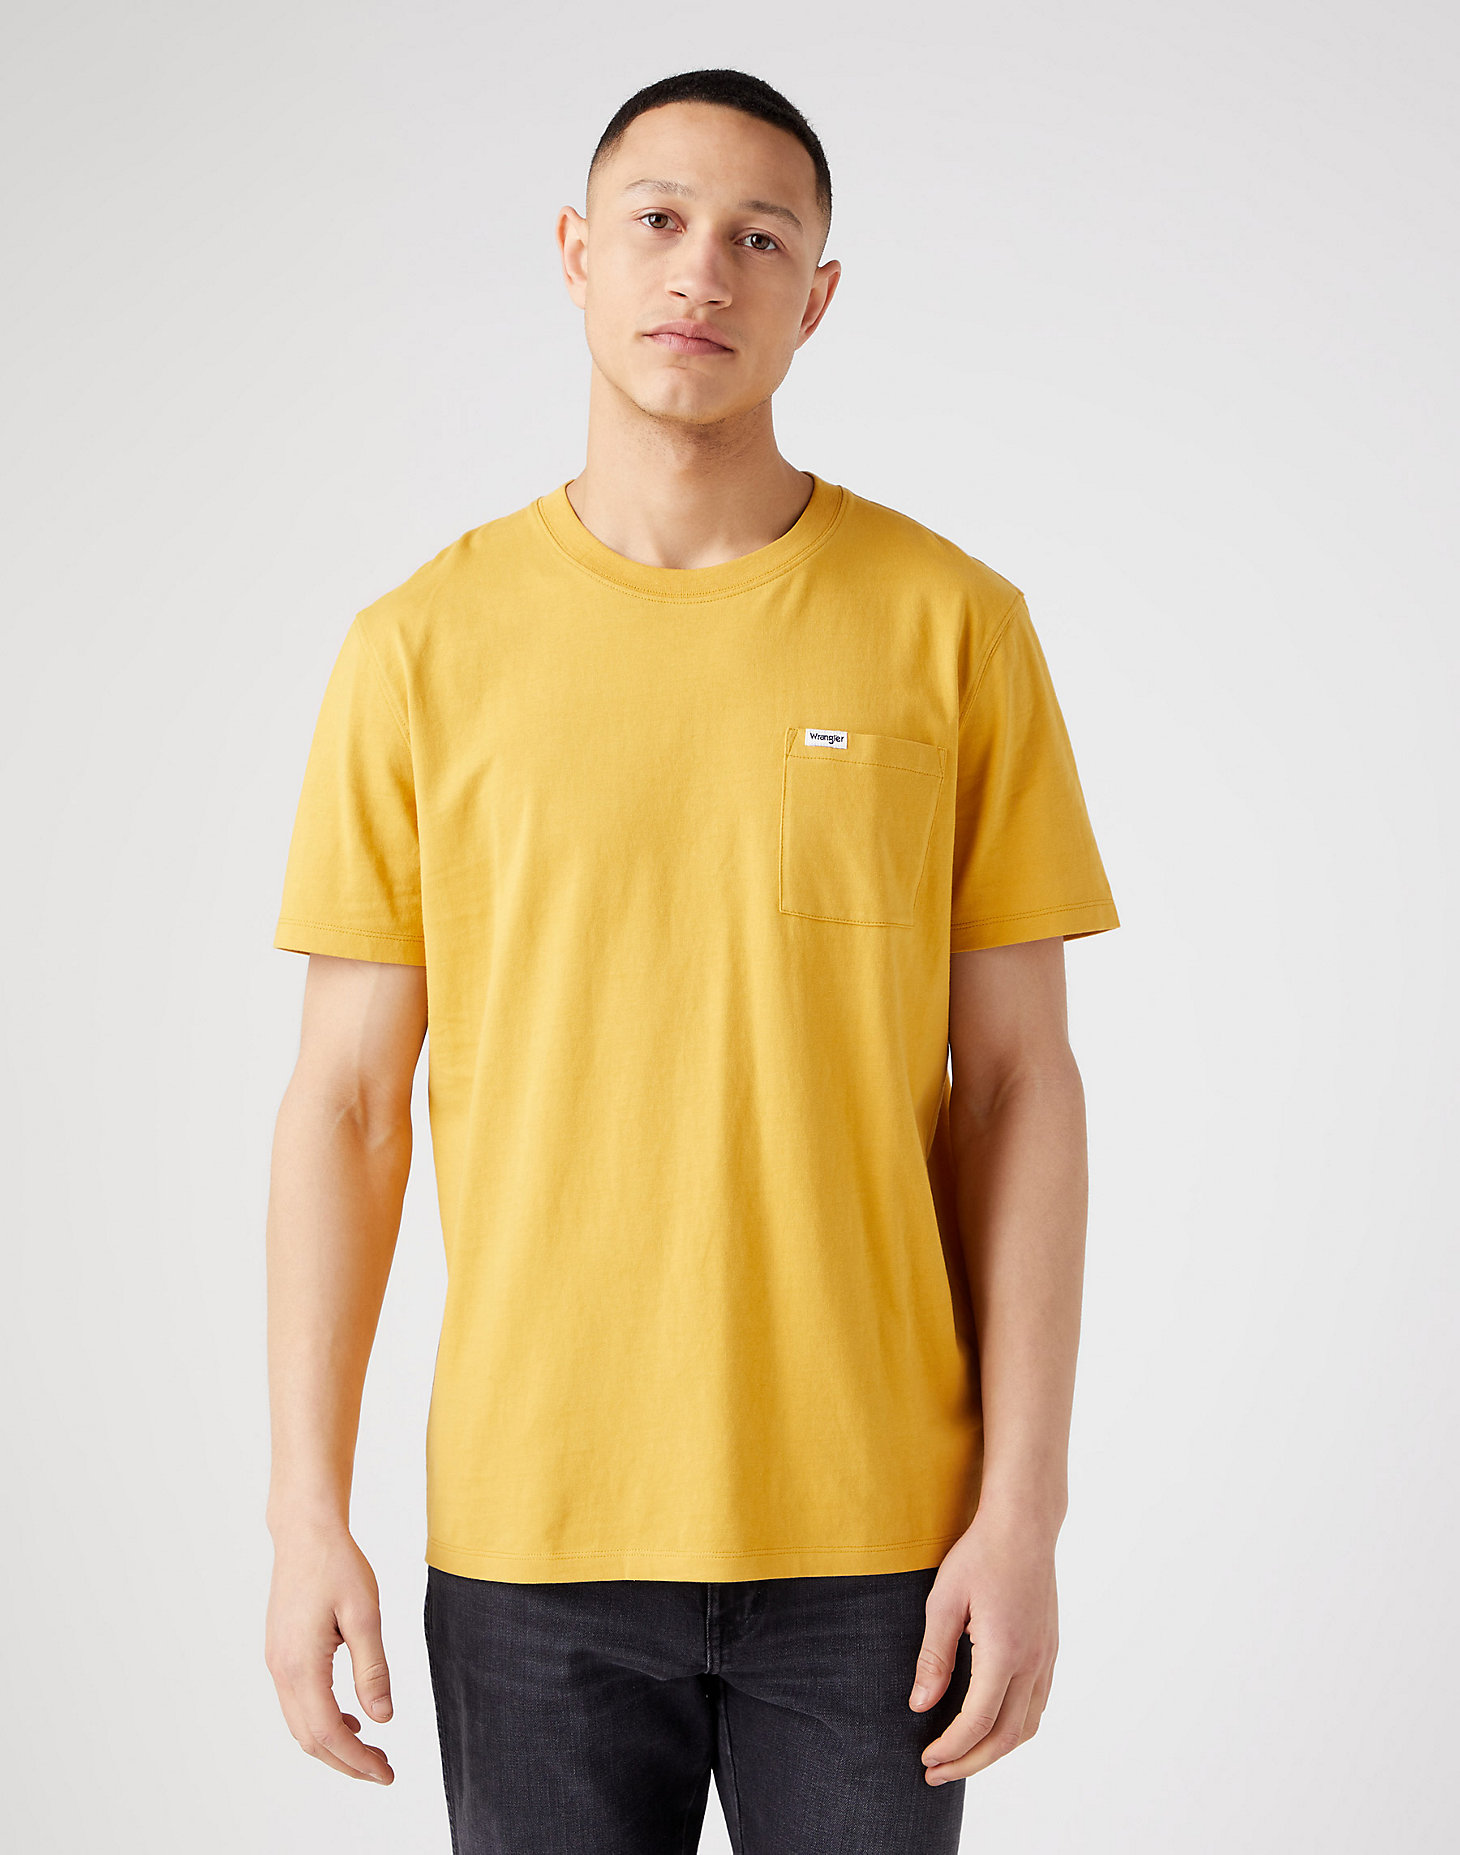 Pocket Tee in Golden Spice main view